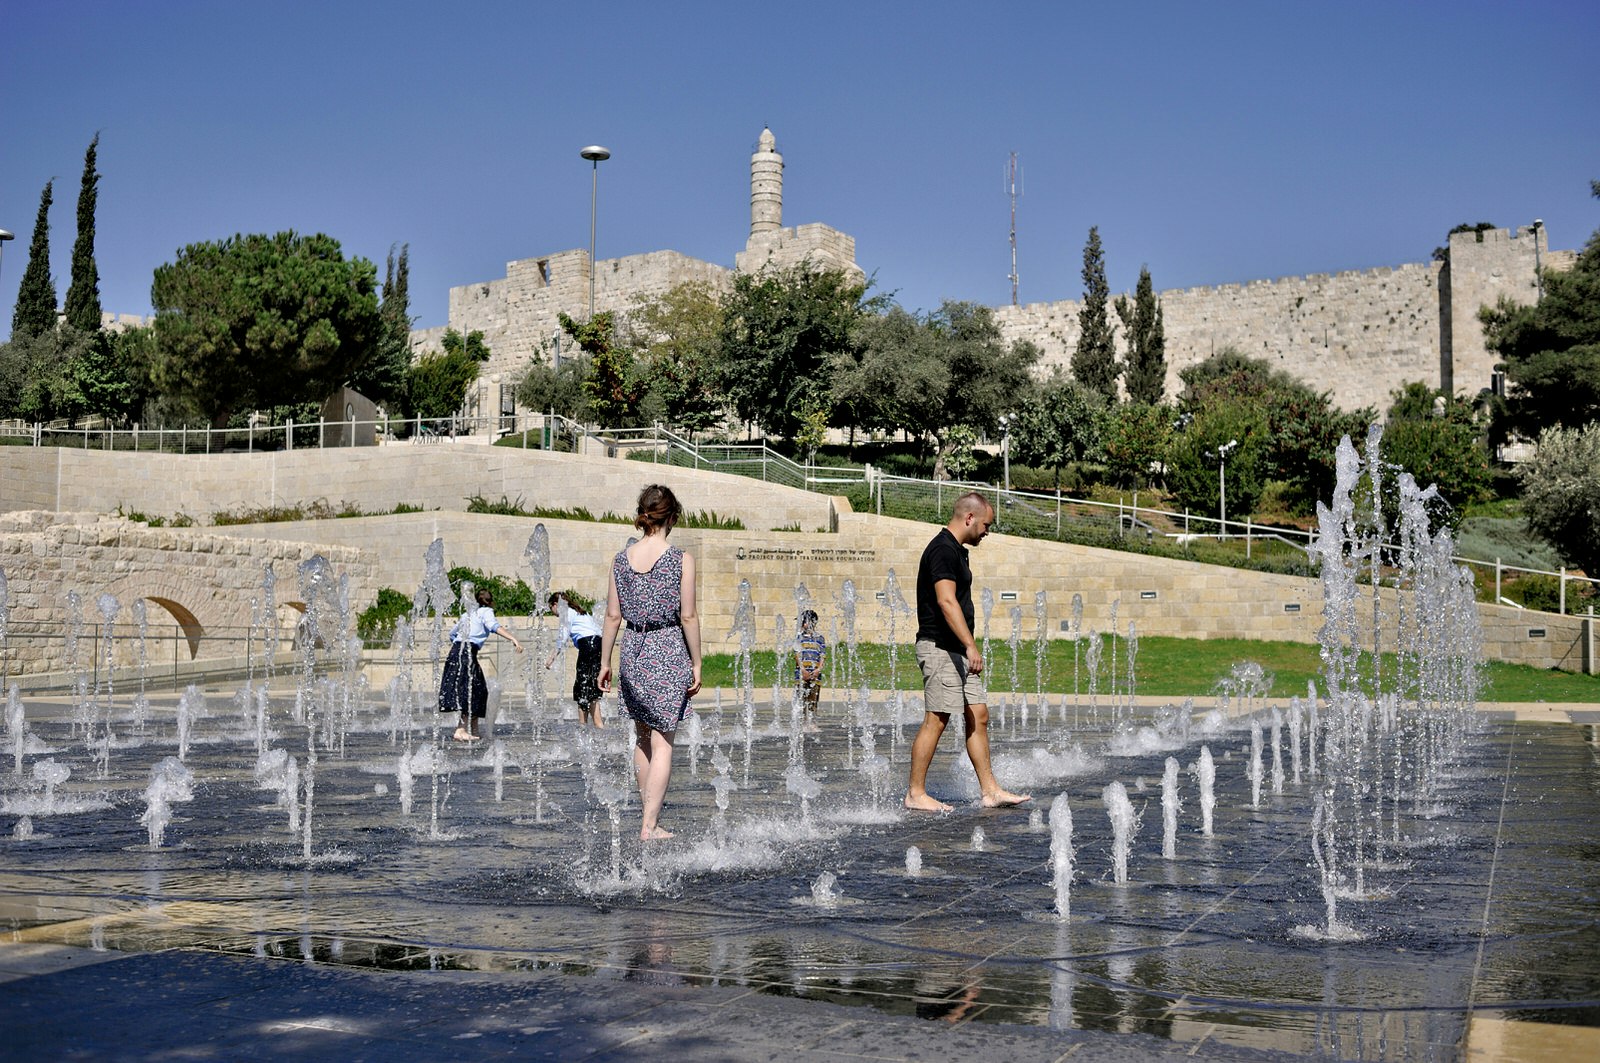 Splashing in the water playgrounds in Jerusalem. Image by Jan Hon / Lonely Planet